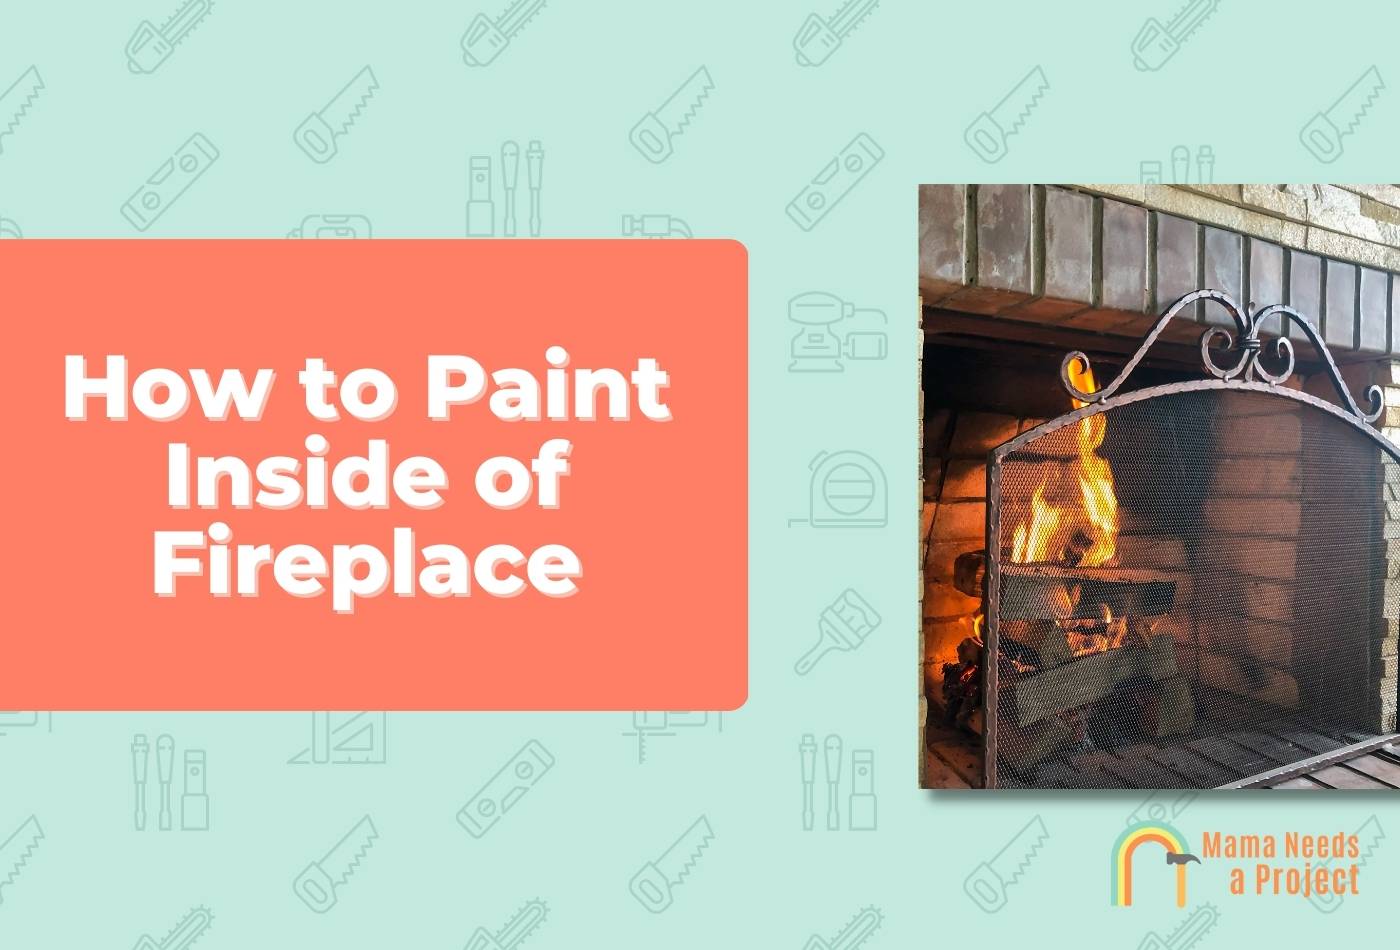 How to Paint Inside of Fireplace